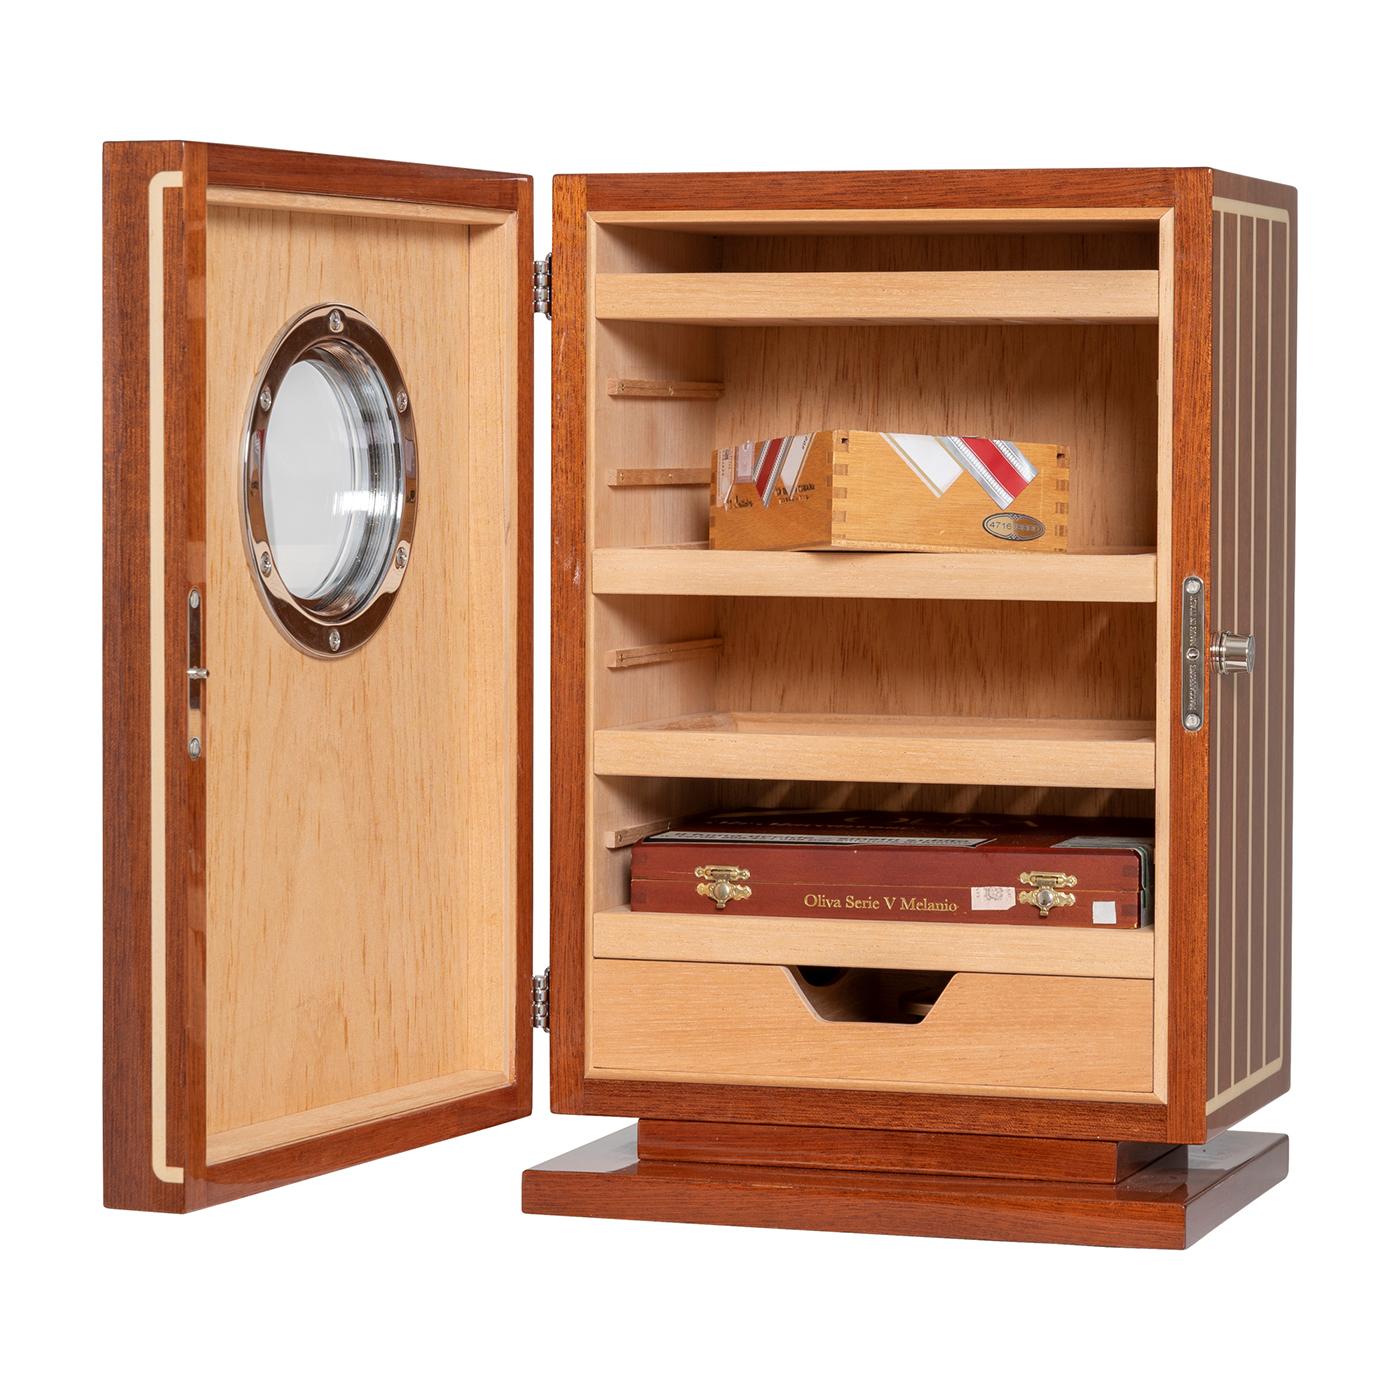 This iconic humidor is part of Maccarone's Yacht collection and can hold up to 150 cigars. Metal accessories in chromed brass and high gloss mahogany and maple inlay enhance this elegant and refined humidor designed for yacht and cigar enthusiasts.